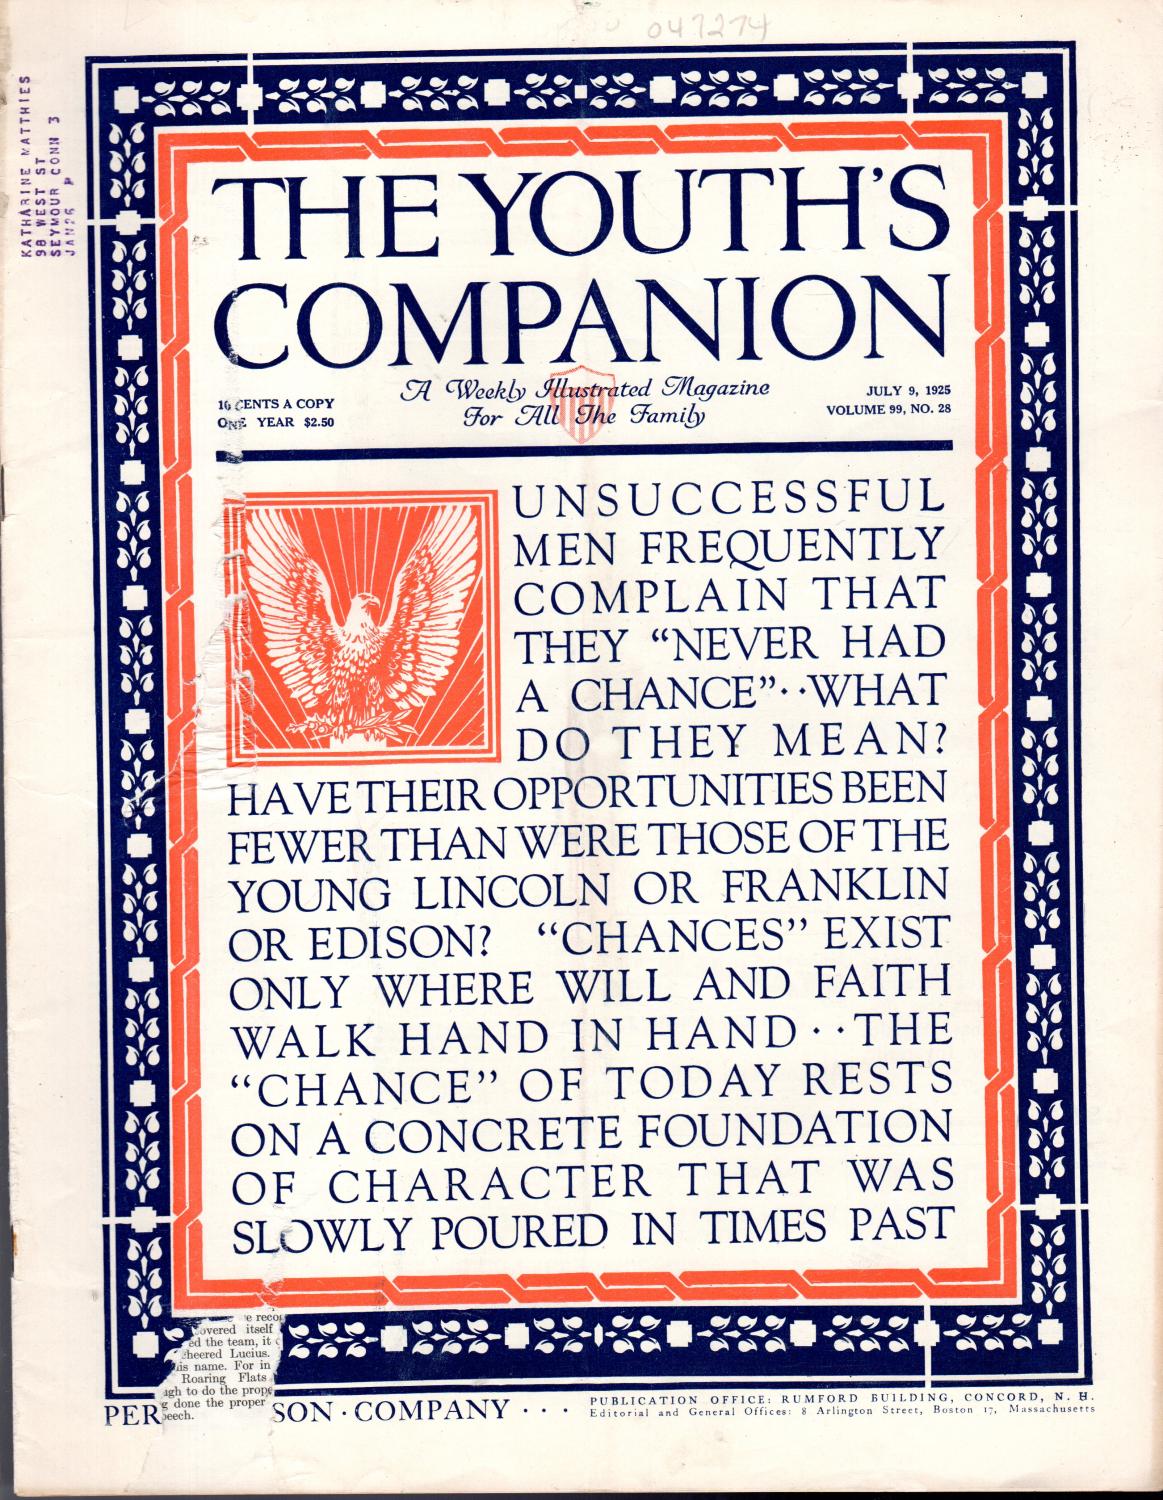 The Youth's Companion: Volume 99, No. 28